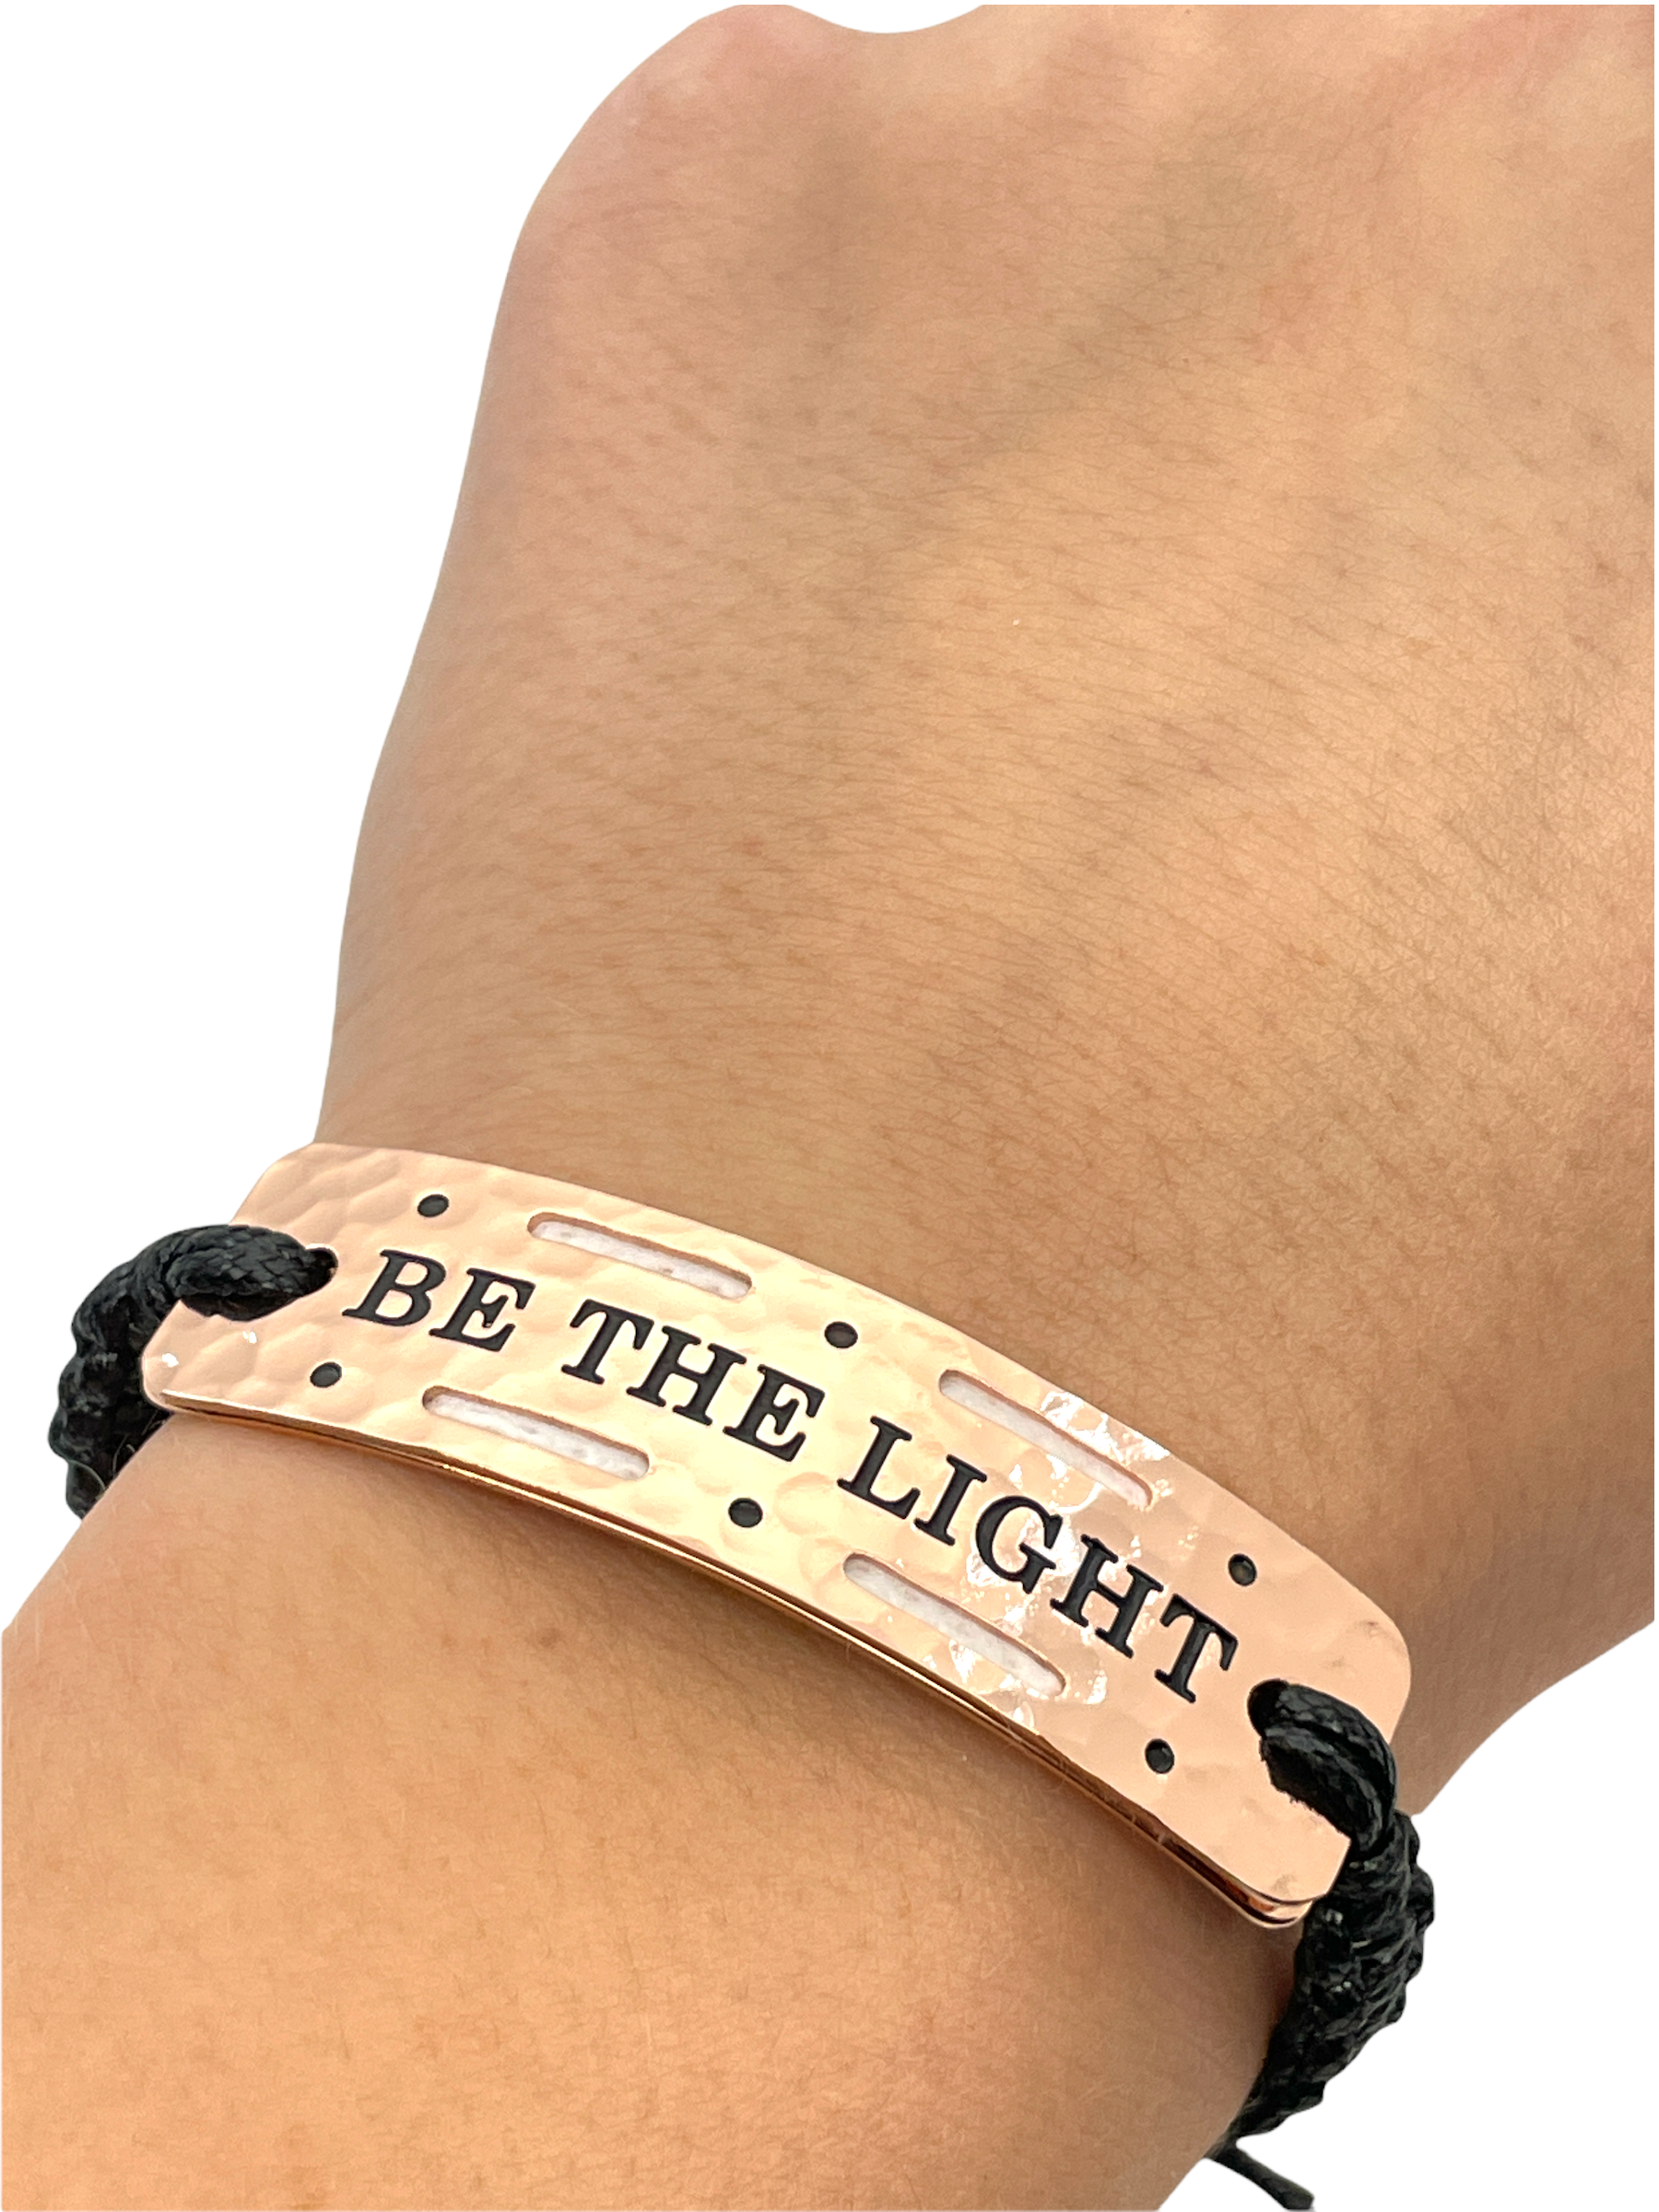 Be The Light- Vented In Brooklyn Power Word Aromatherapy Essential OIl Diffuser Bracelet